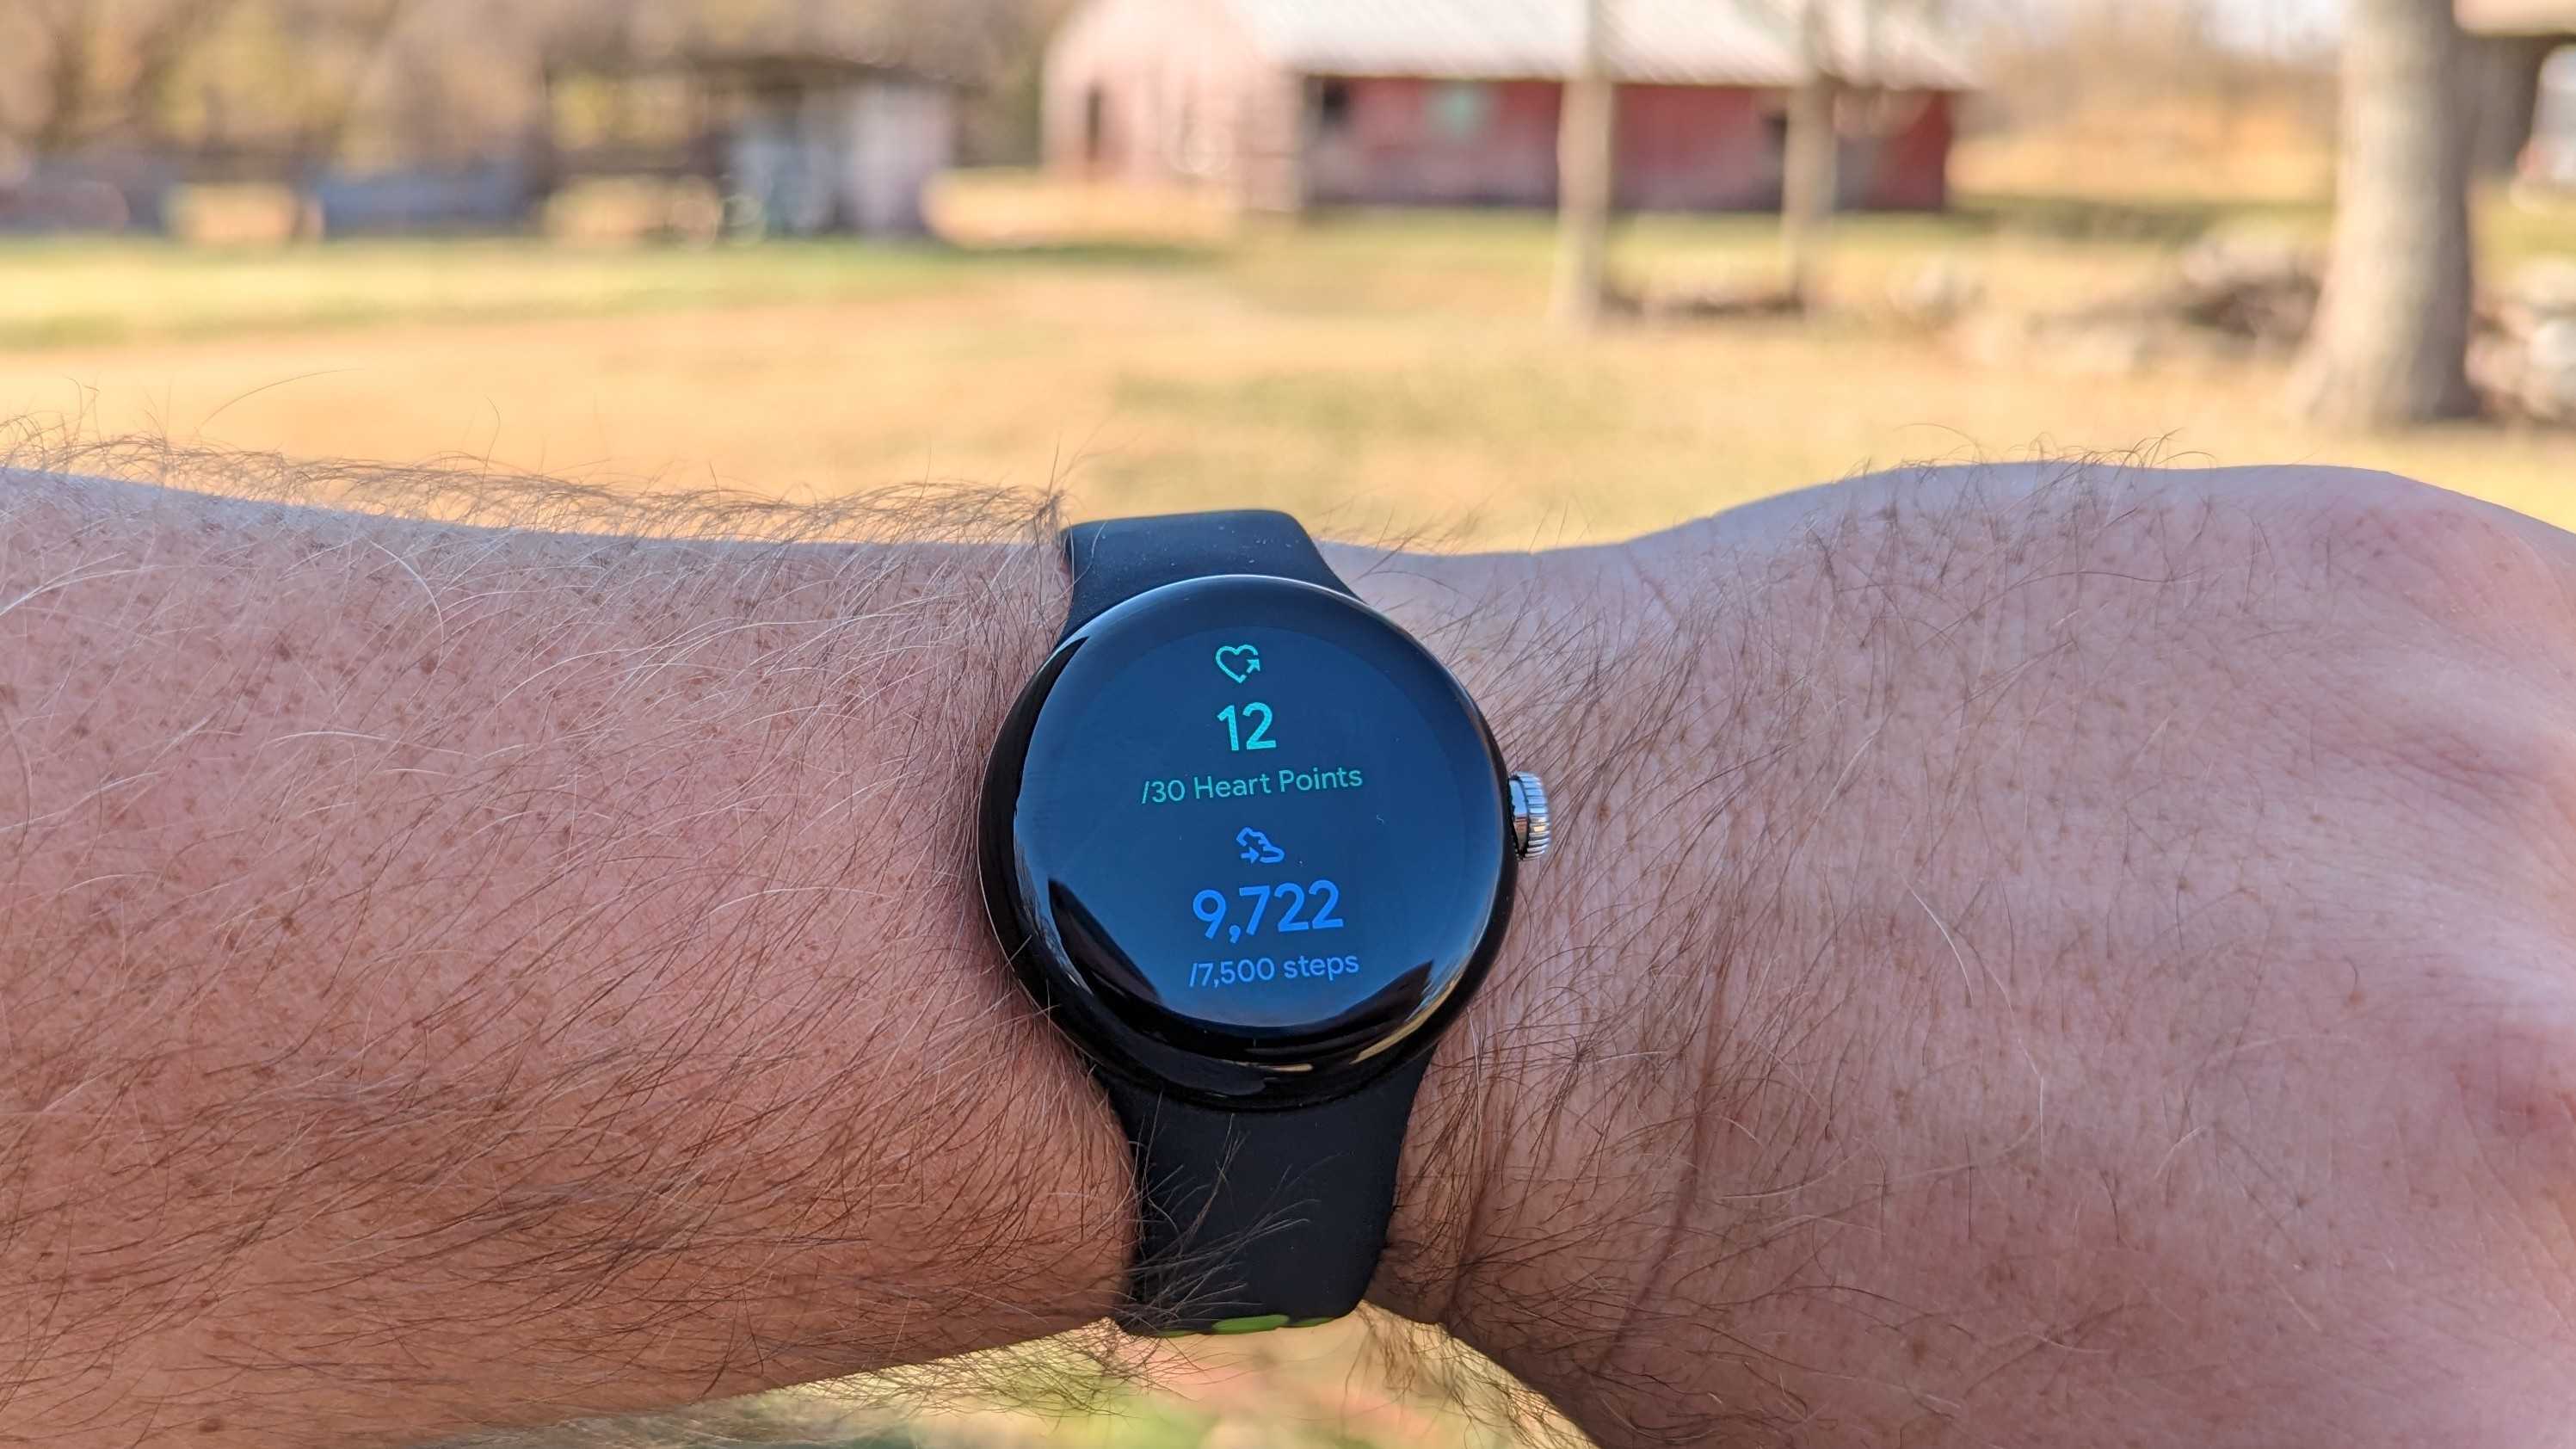 Google Fit heart points and steps on the Google Pixel Watch